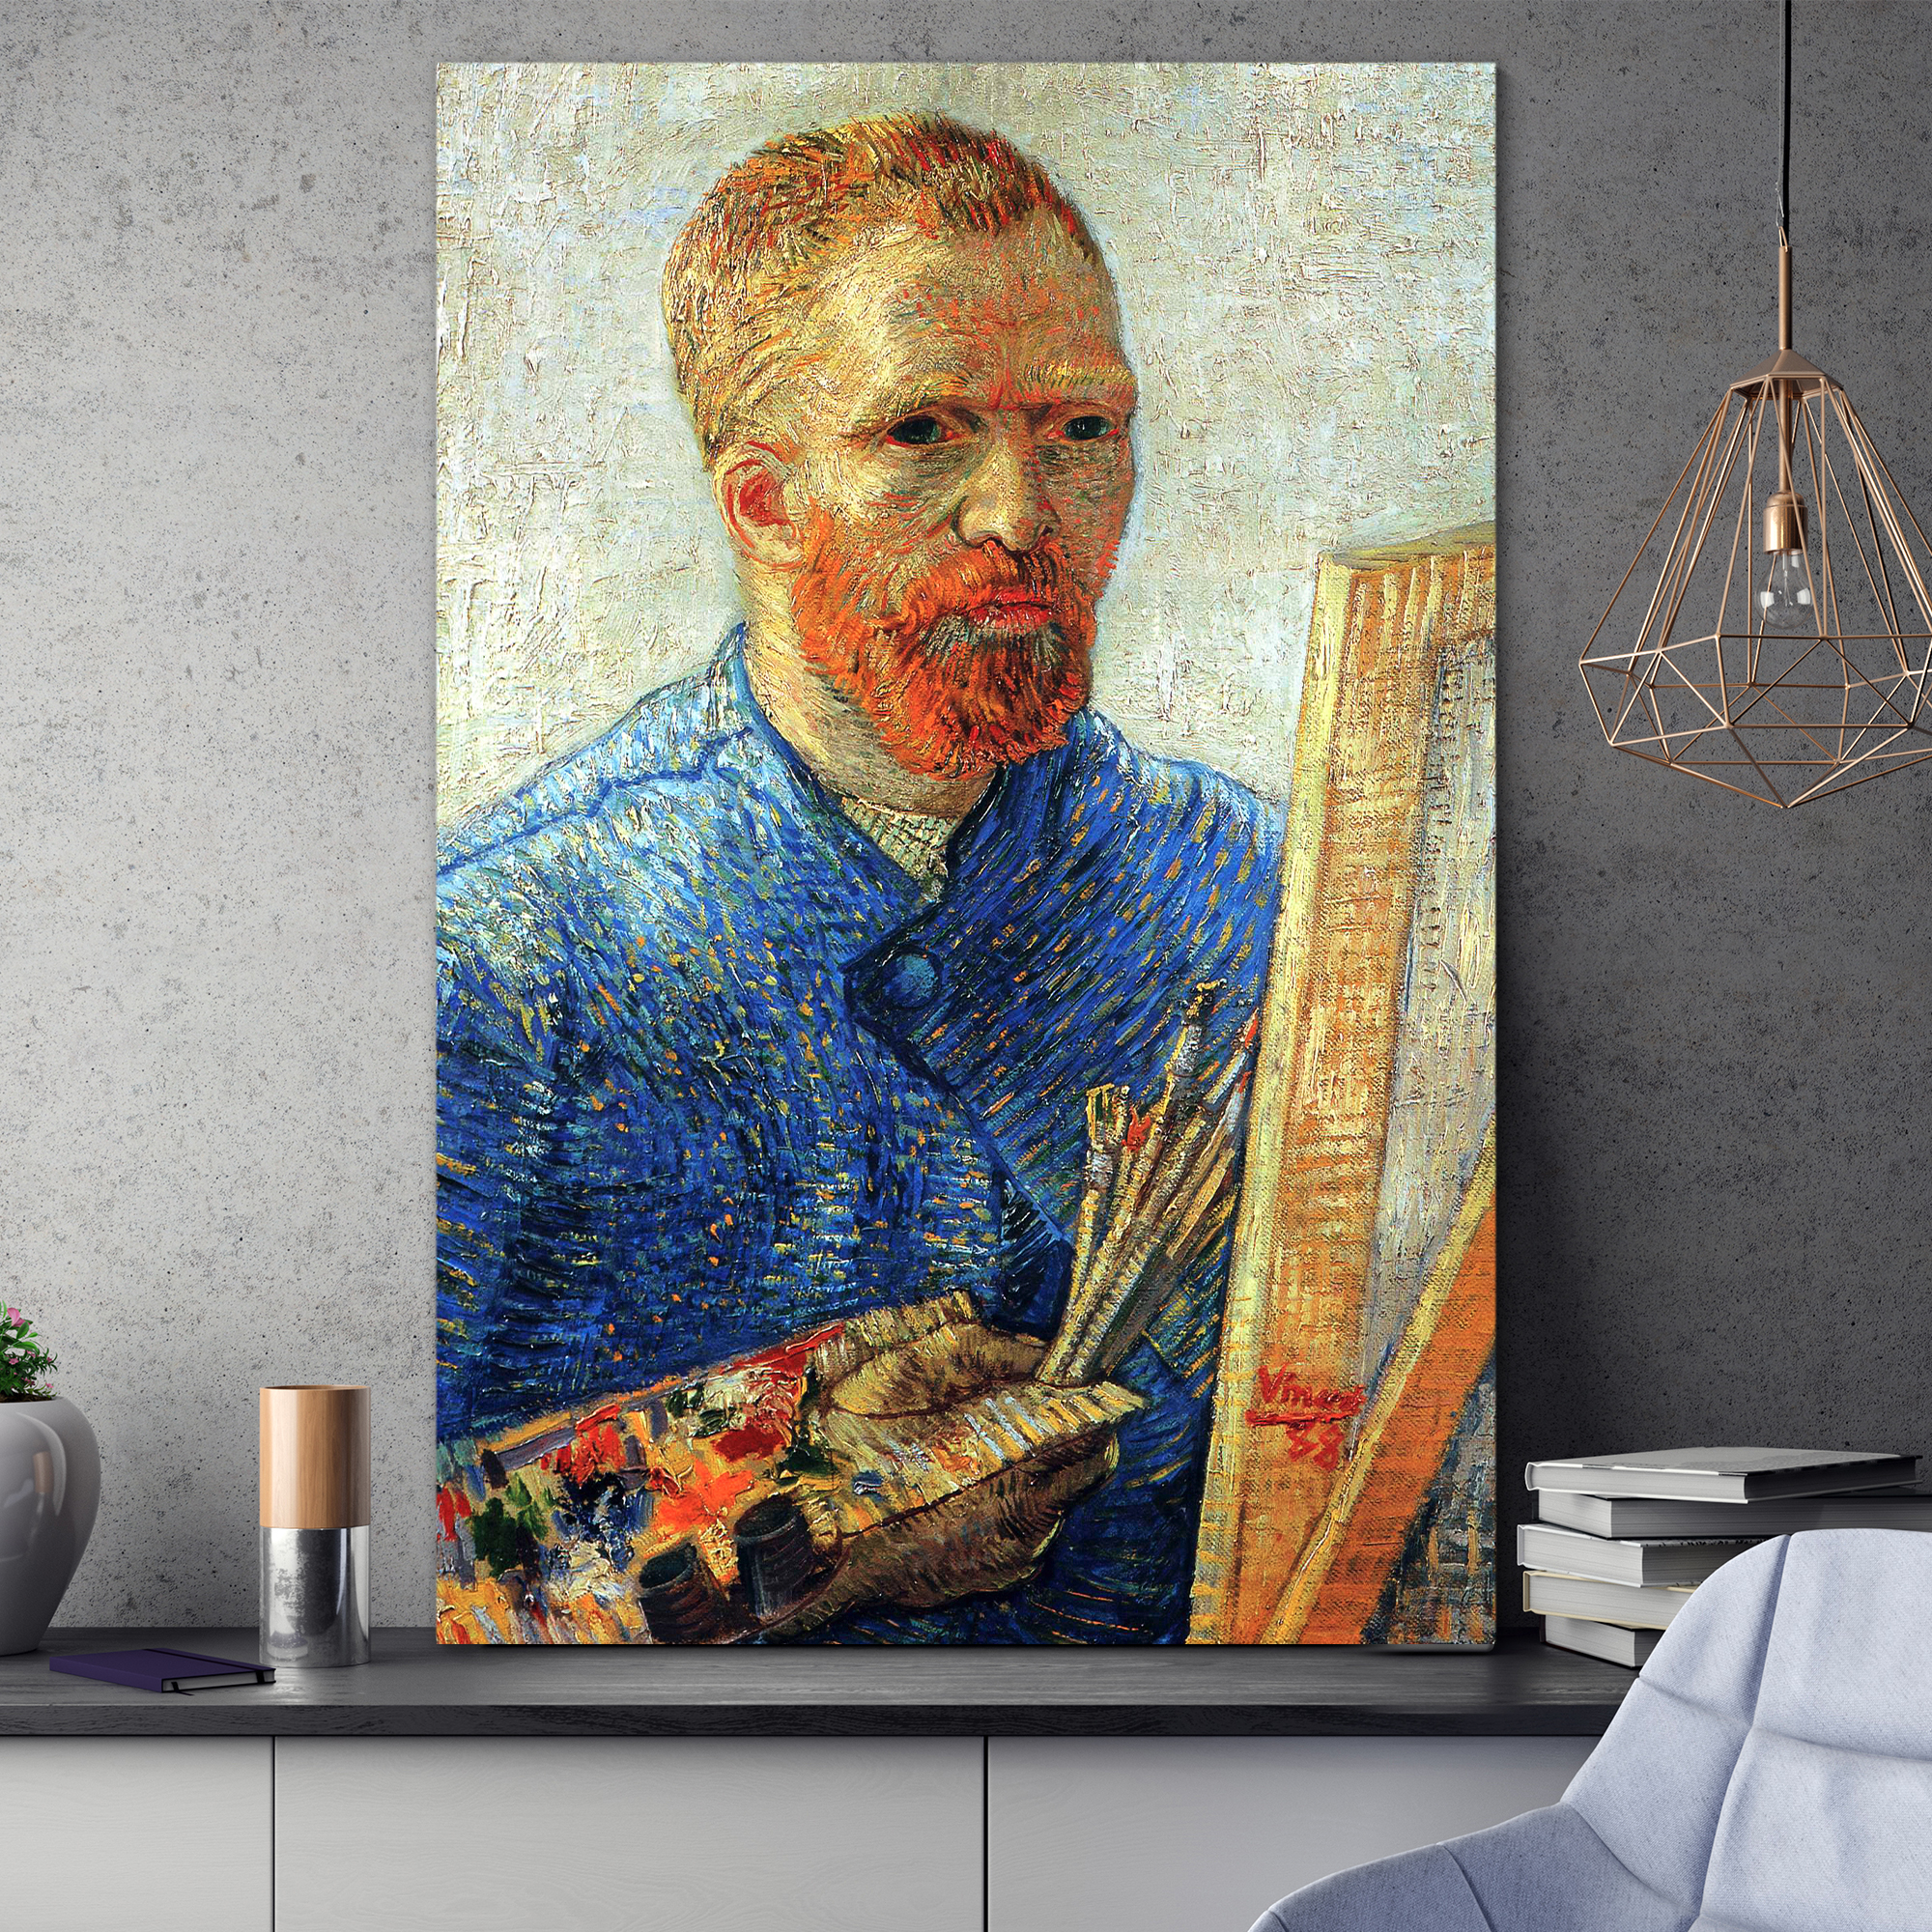 Self Portrait as a Painter by Vincent Van Gogh - Oil Painting Reproduction on Canvas Prints Wall Art, Ready to Hang - 24